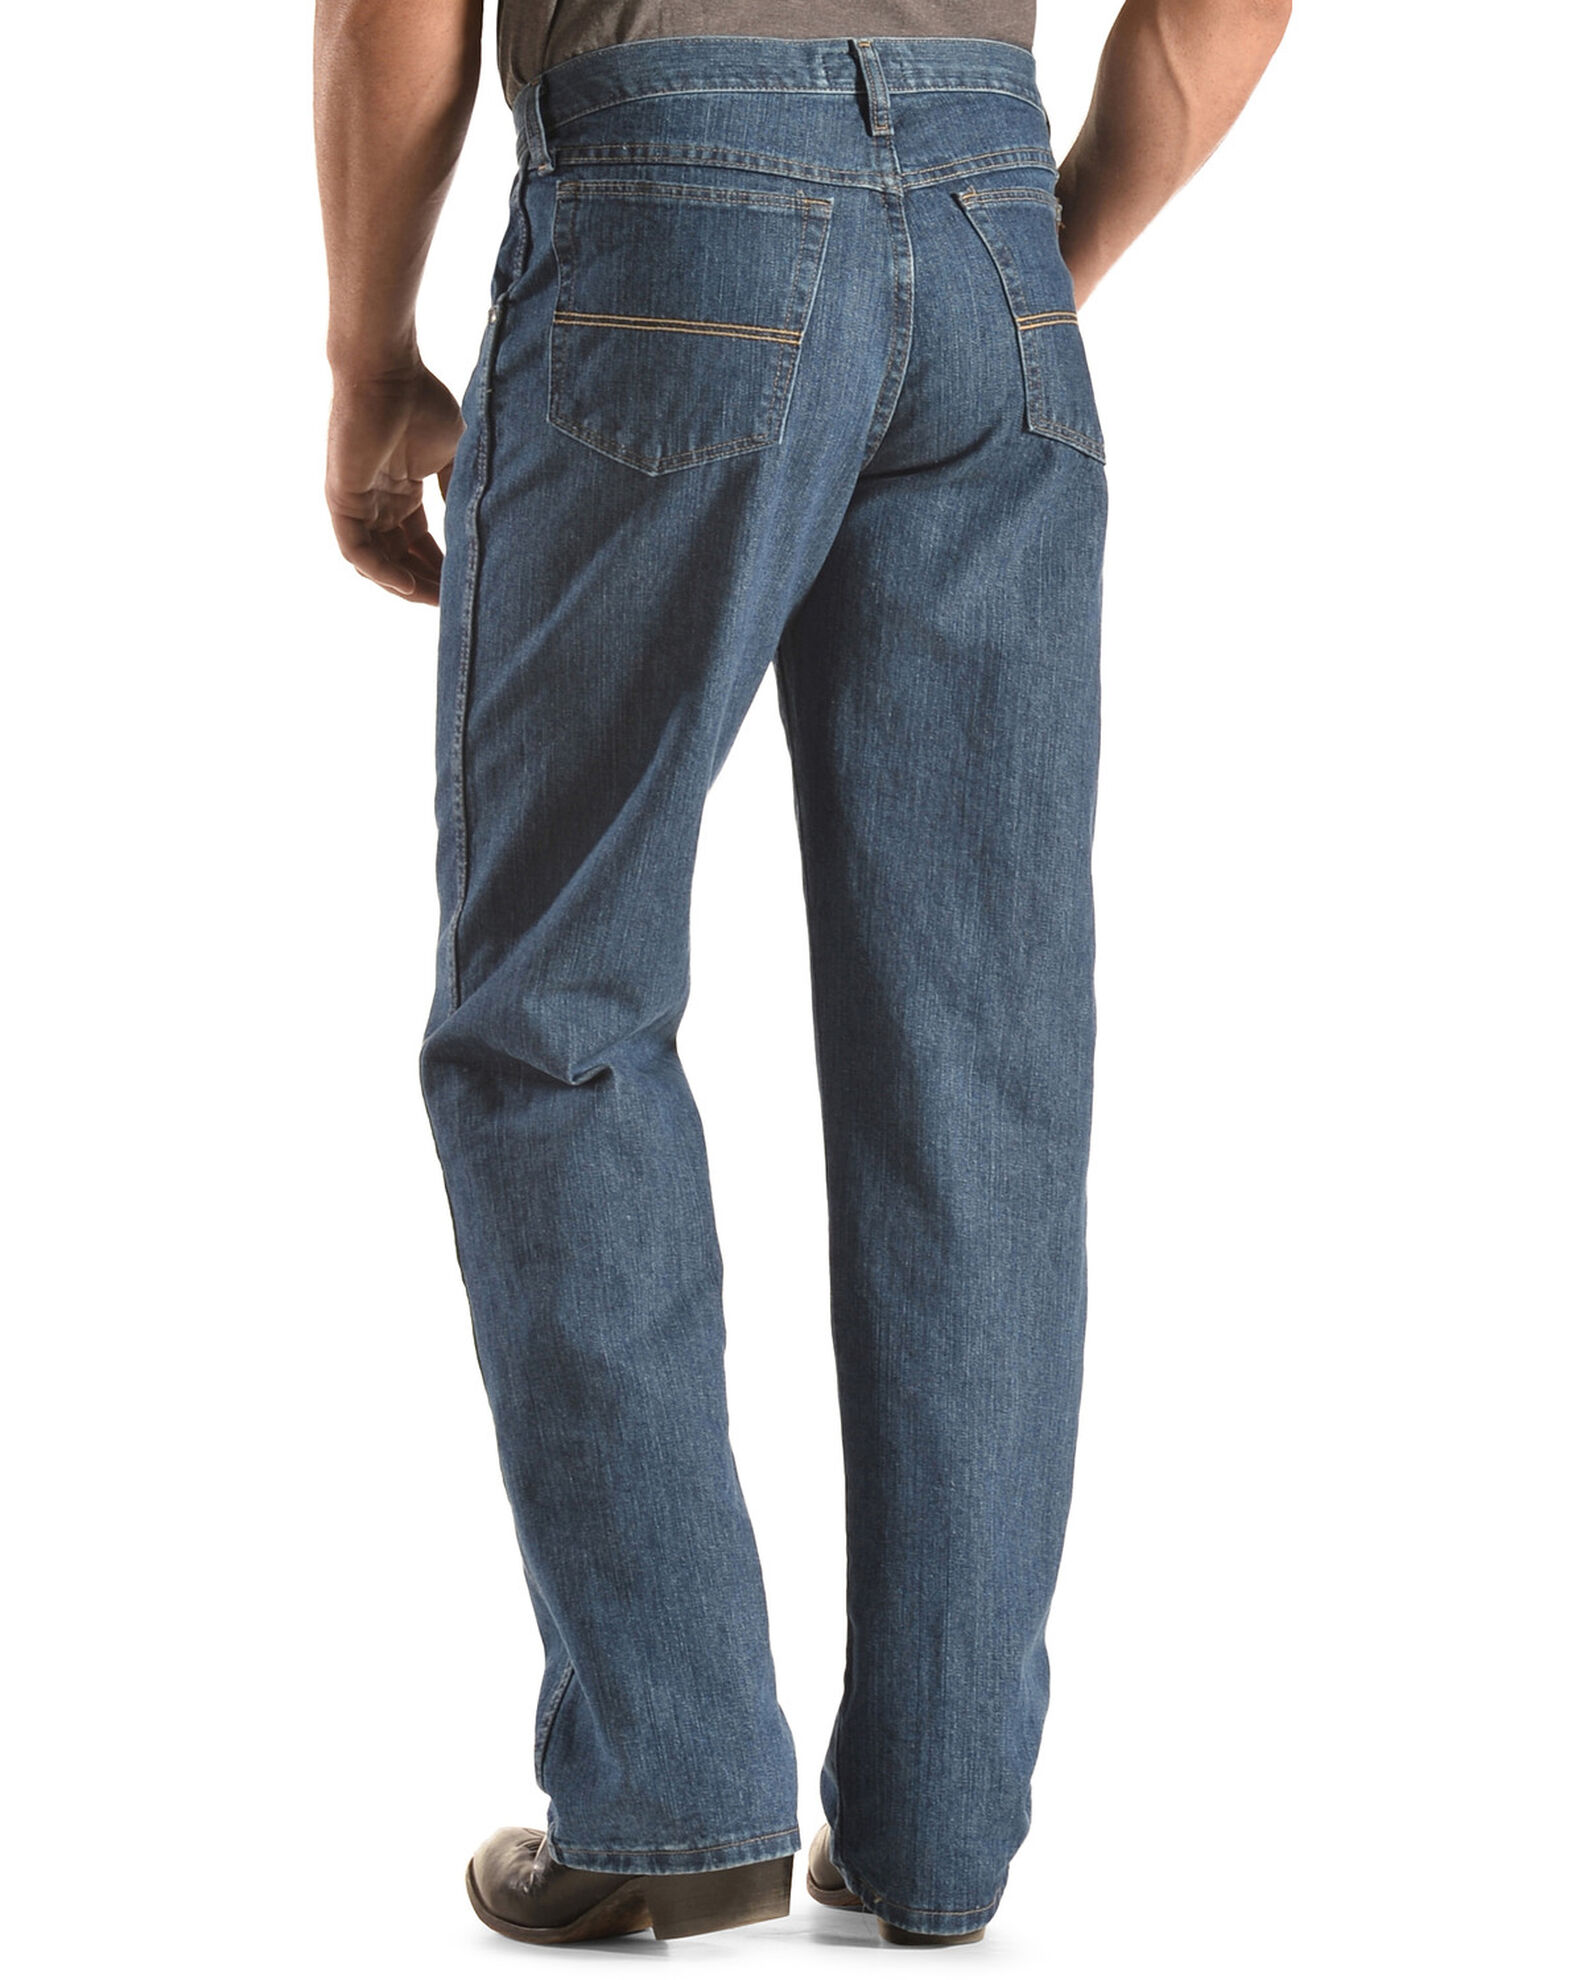 Wrangler 20X Men's Relaxed Fit Jeans - Outfitter